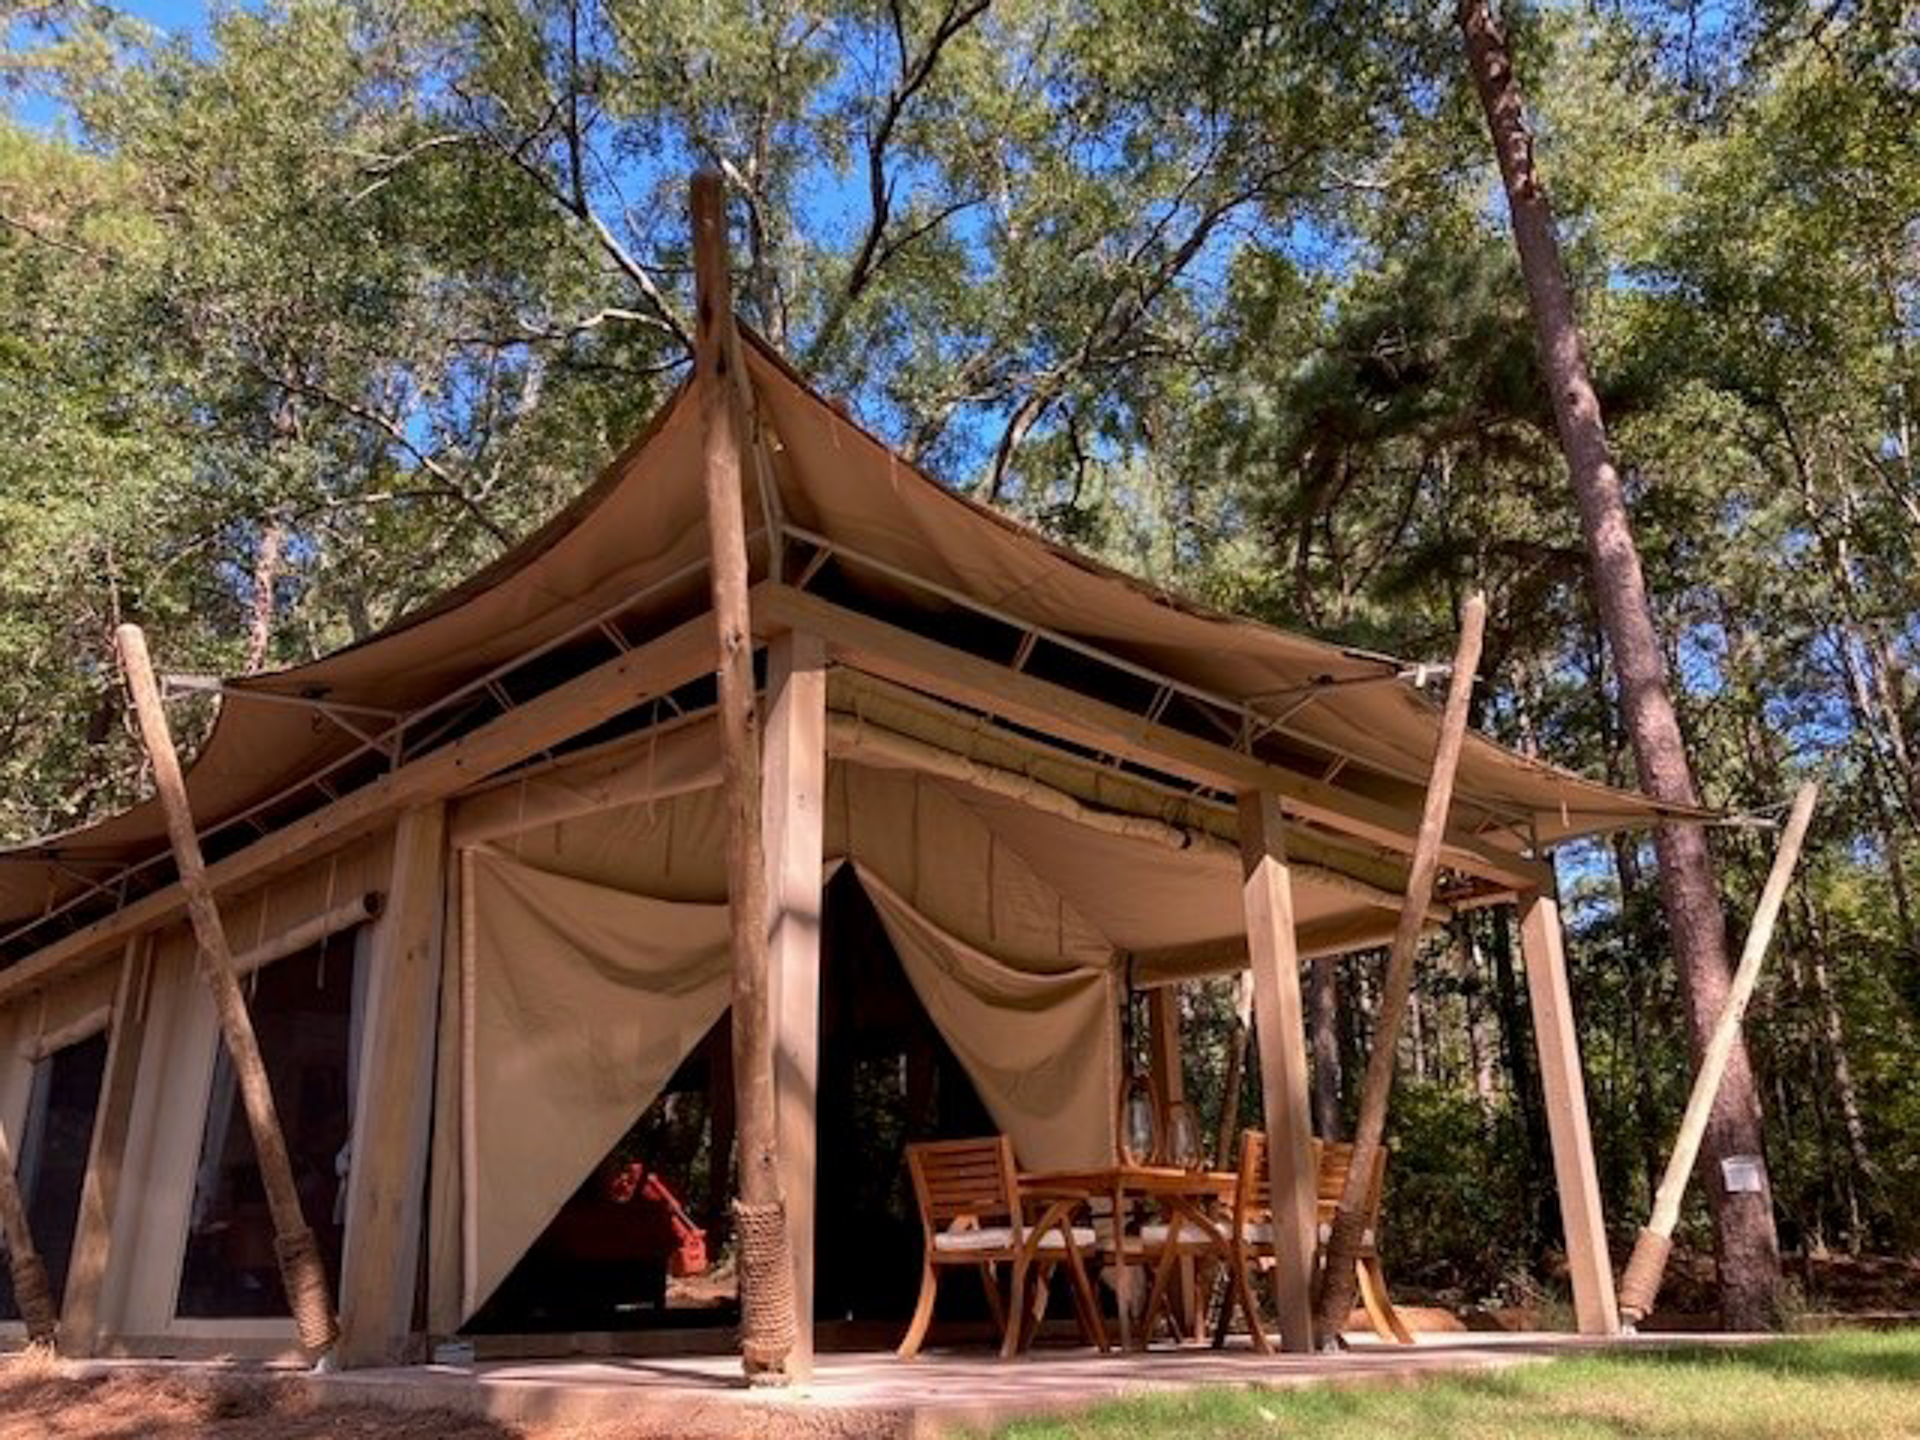 Safari style glamping tent in wooded area